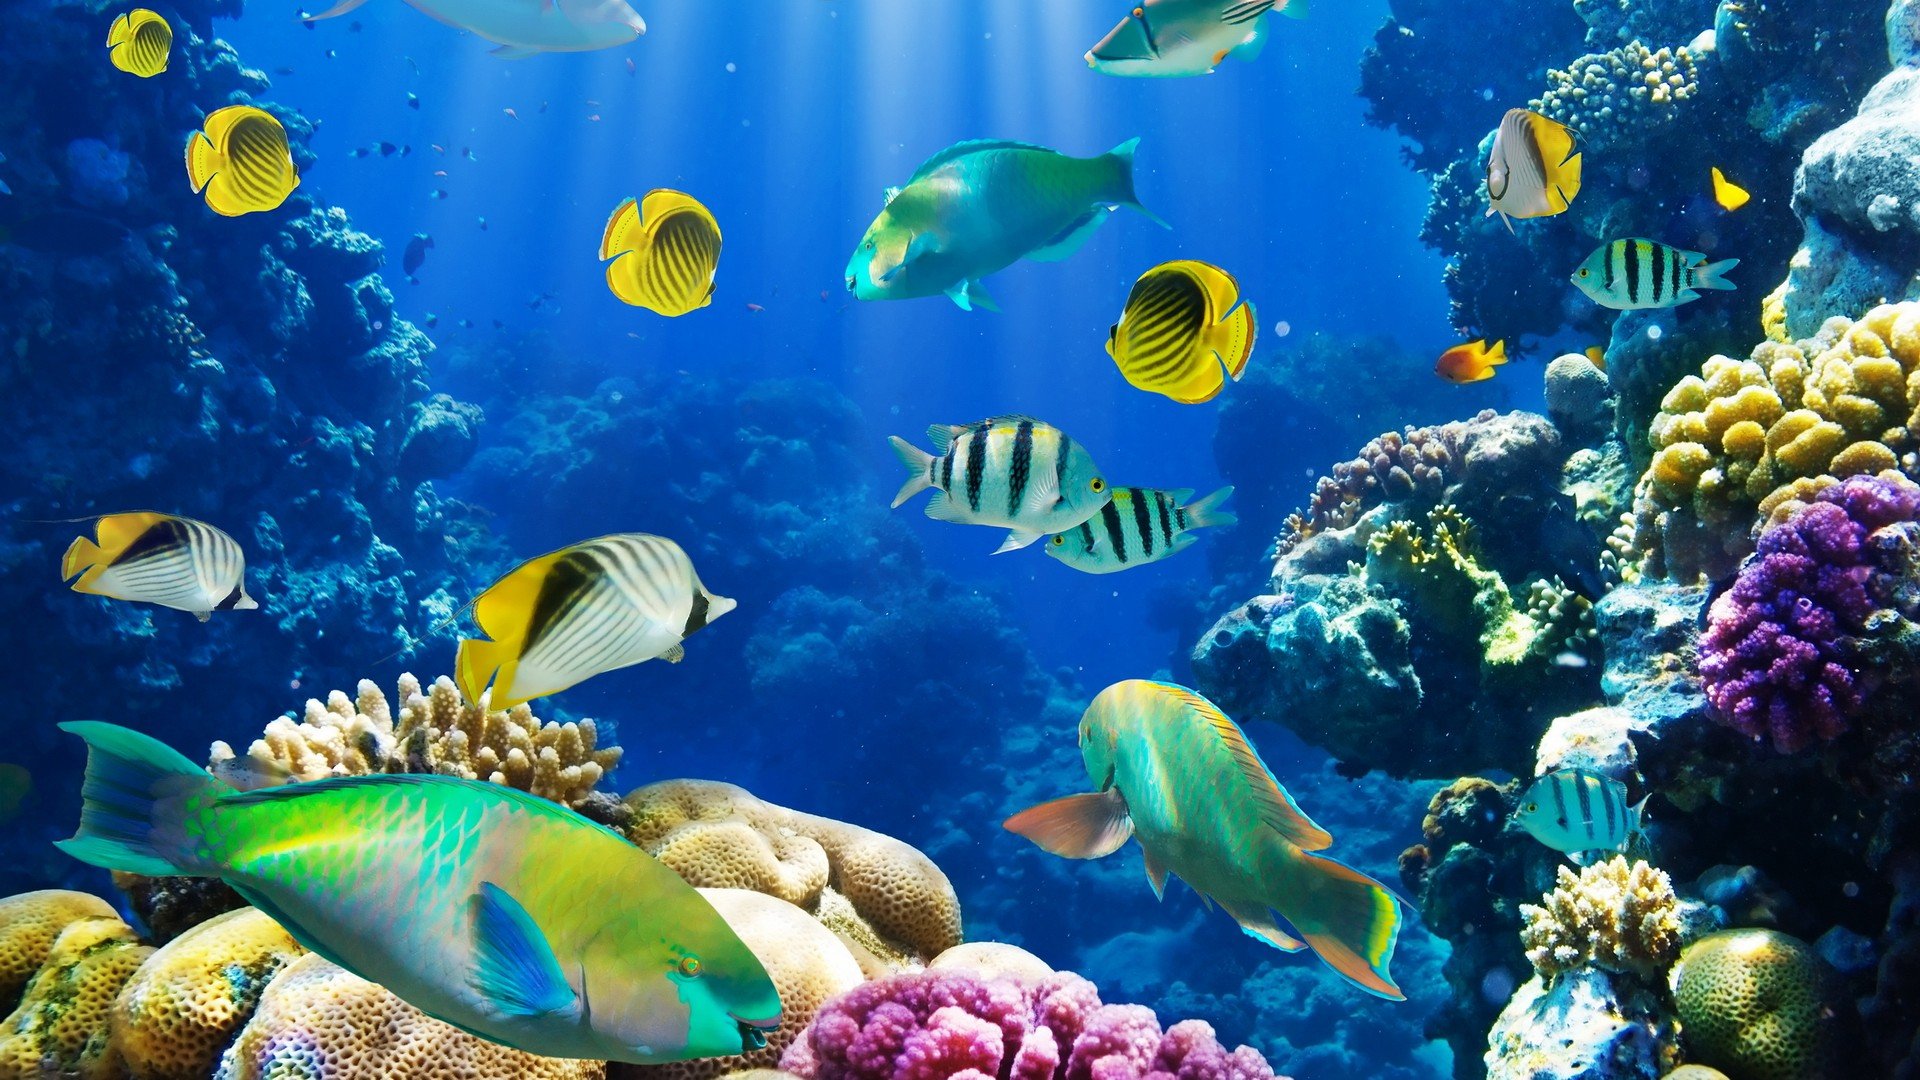 Nature Fish Coral Reef Exotic Wallpaper Background